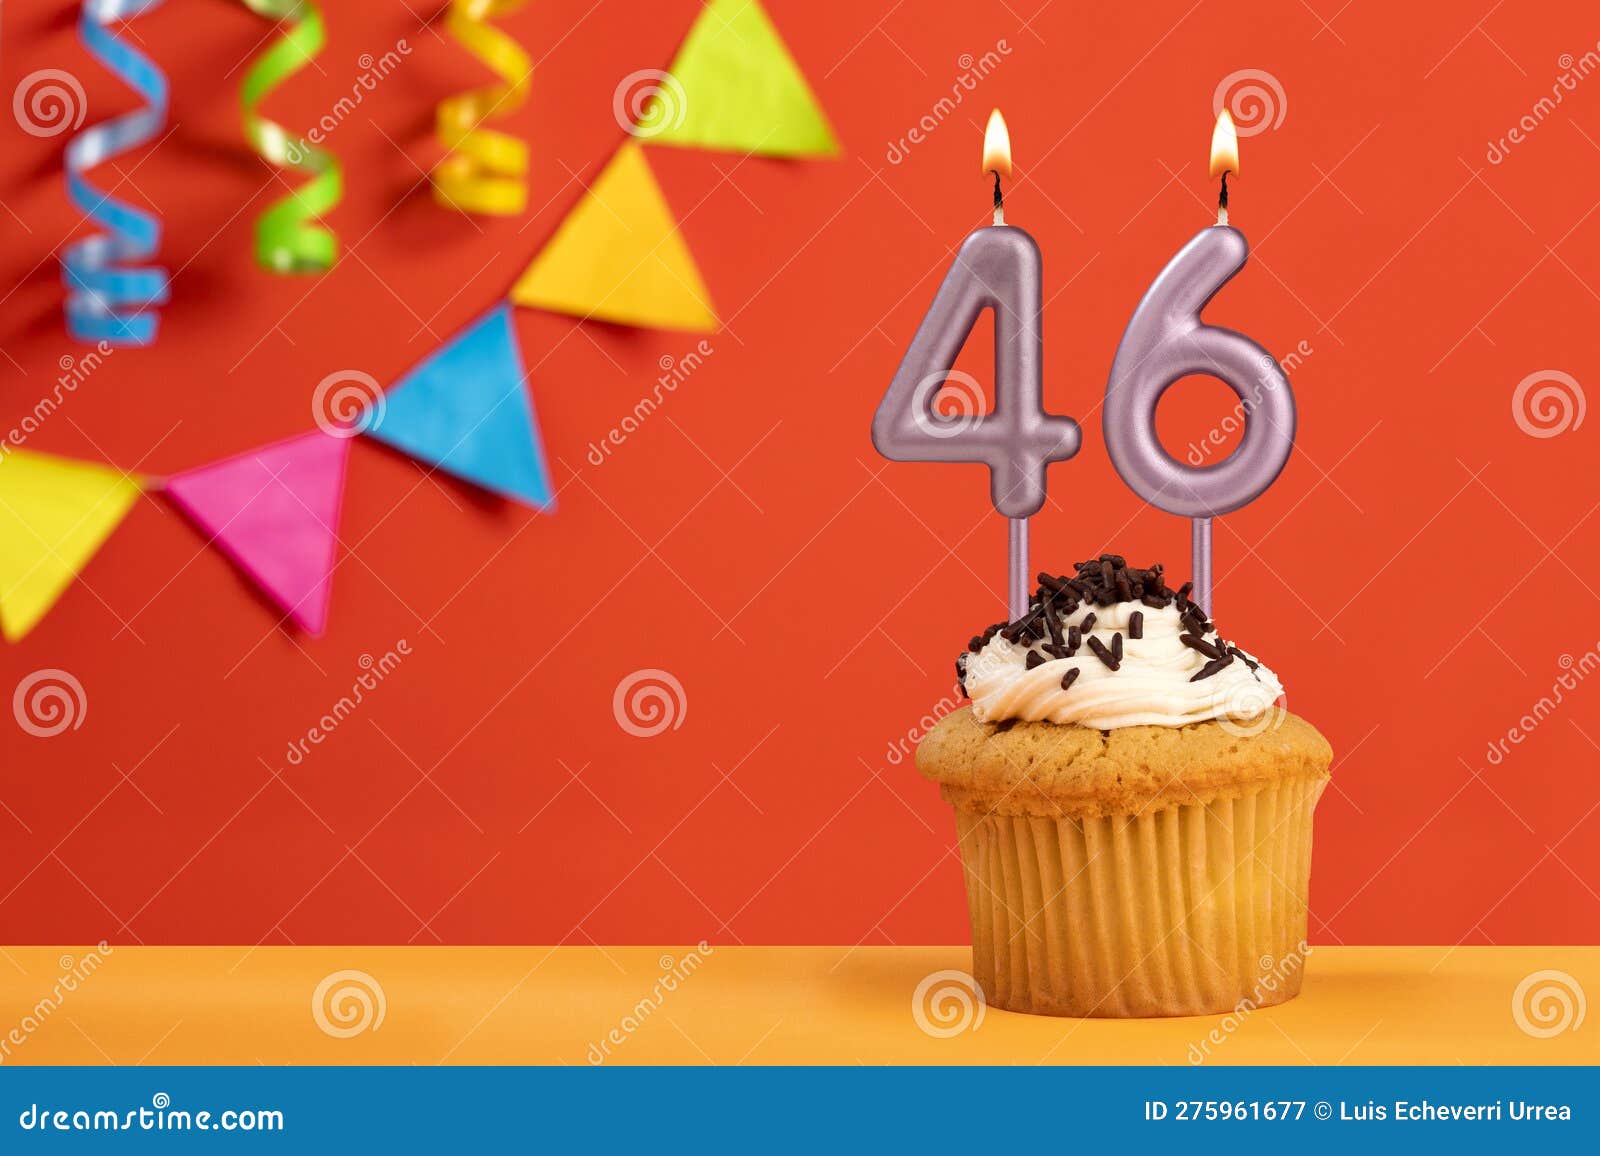 Candle number 46  Cake birthday in coral fusion background Stock Photo   Alamy